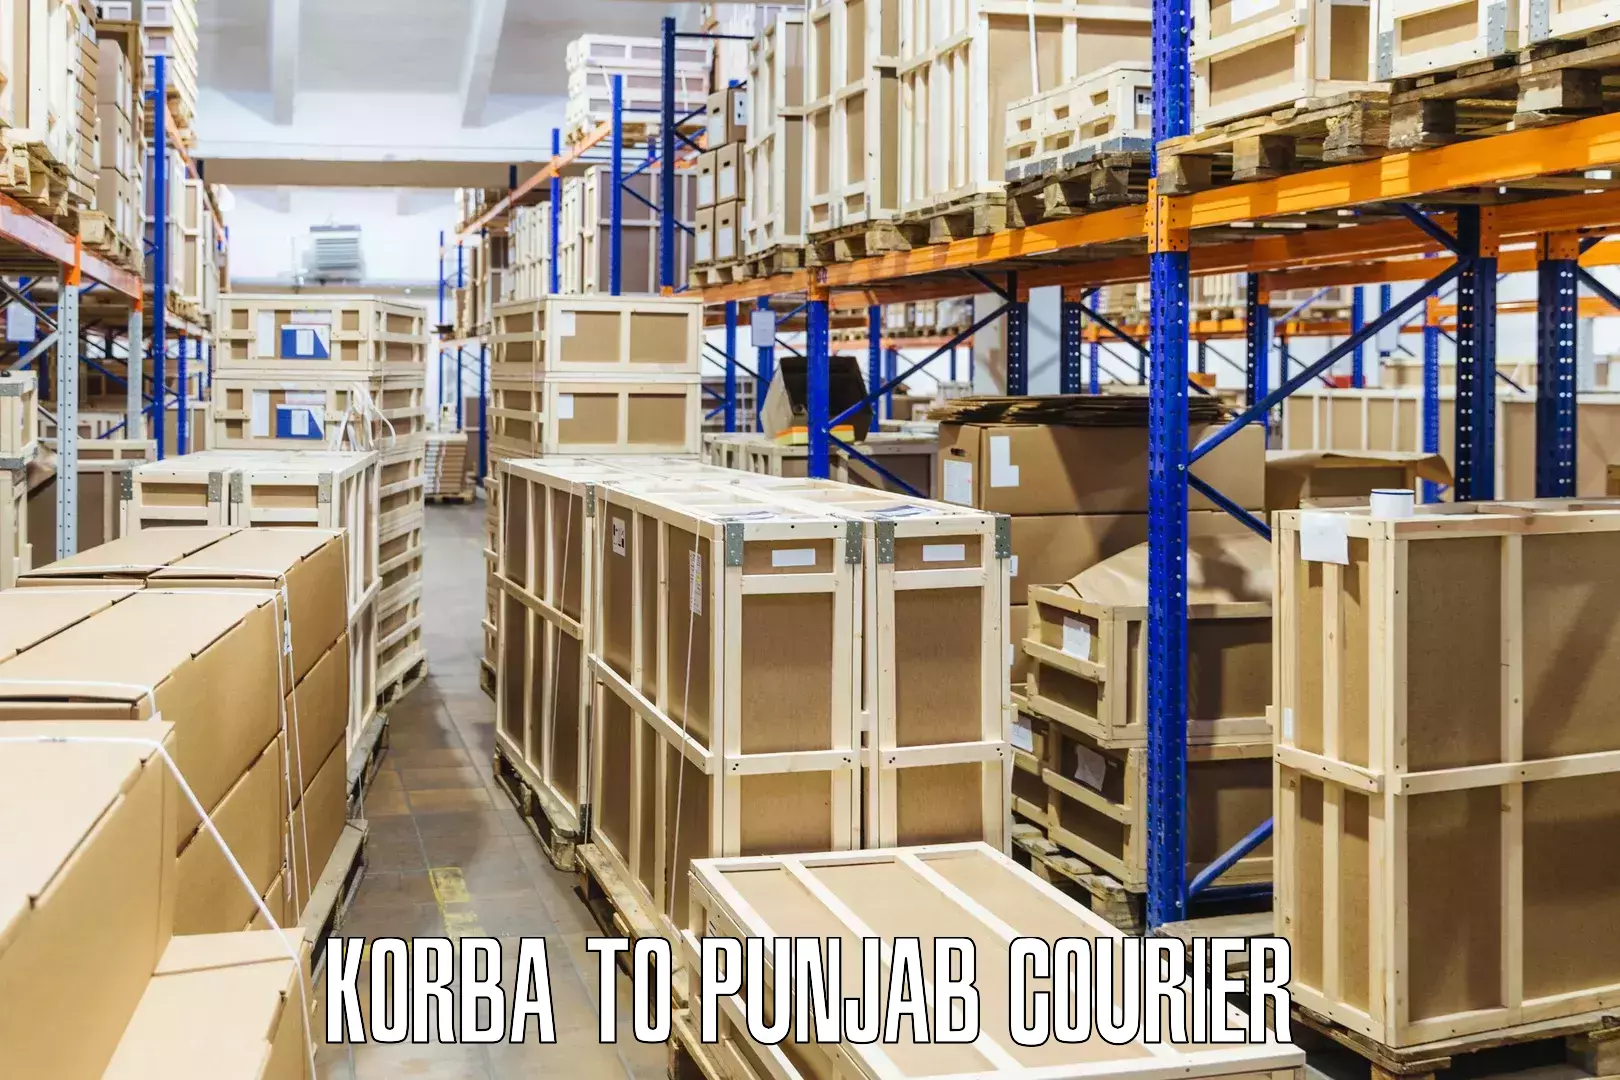 Premium courier solutions Korba to Mohali